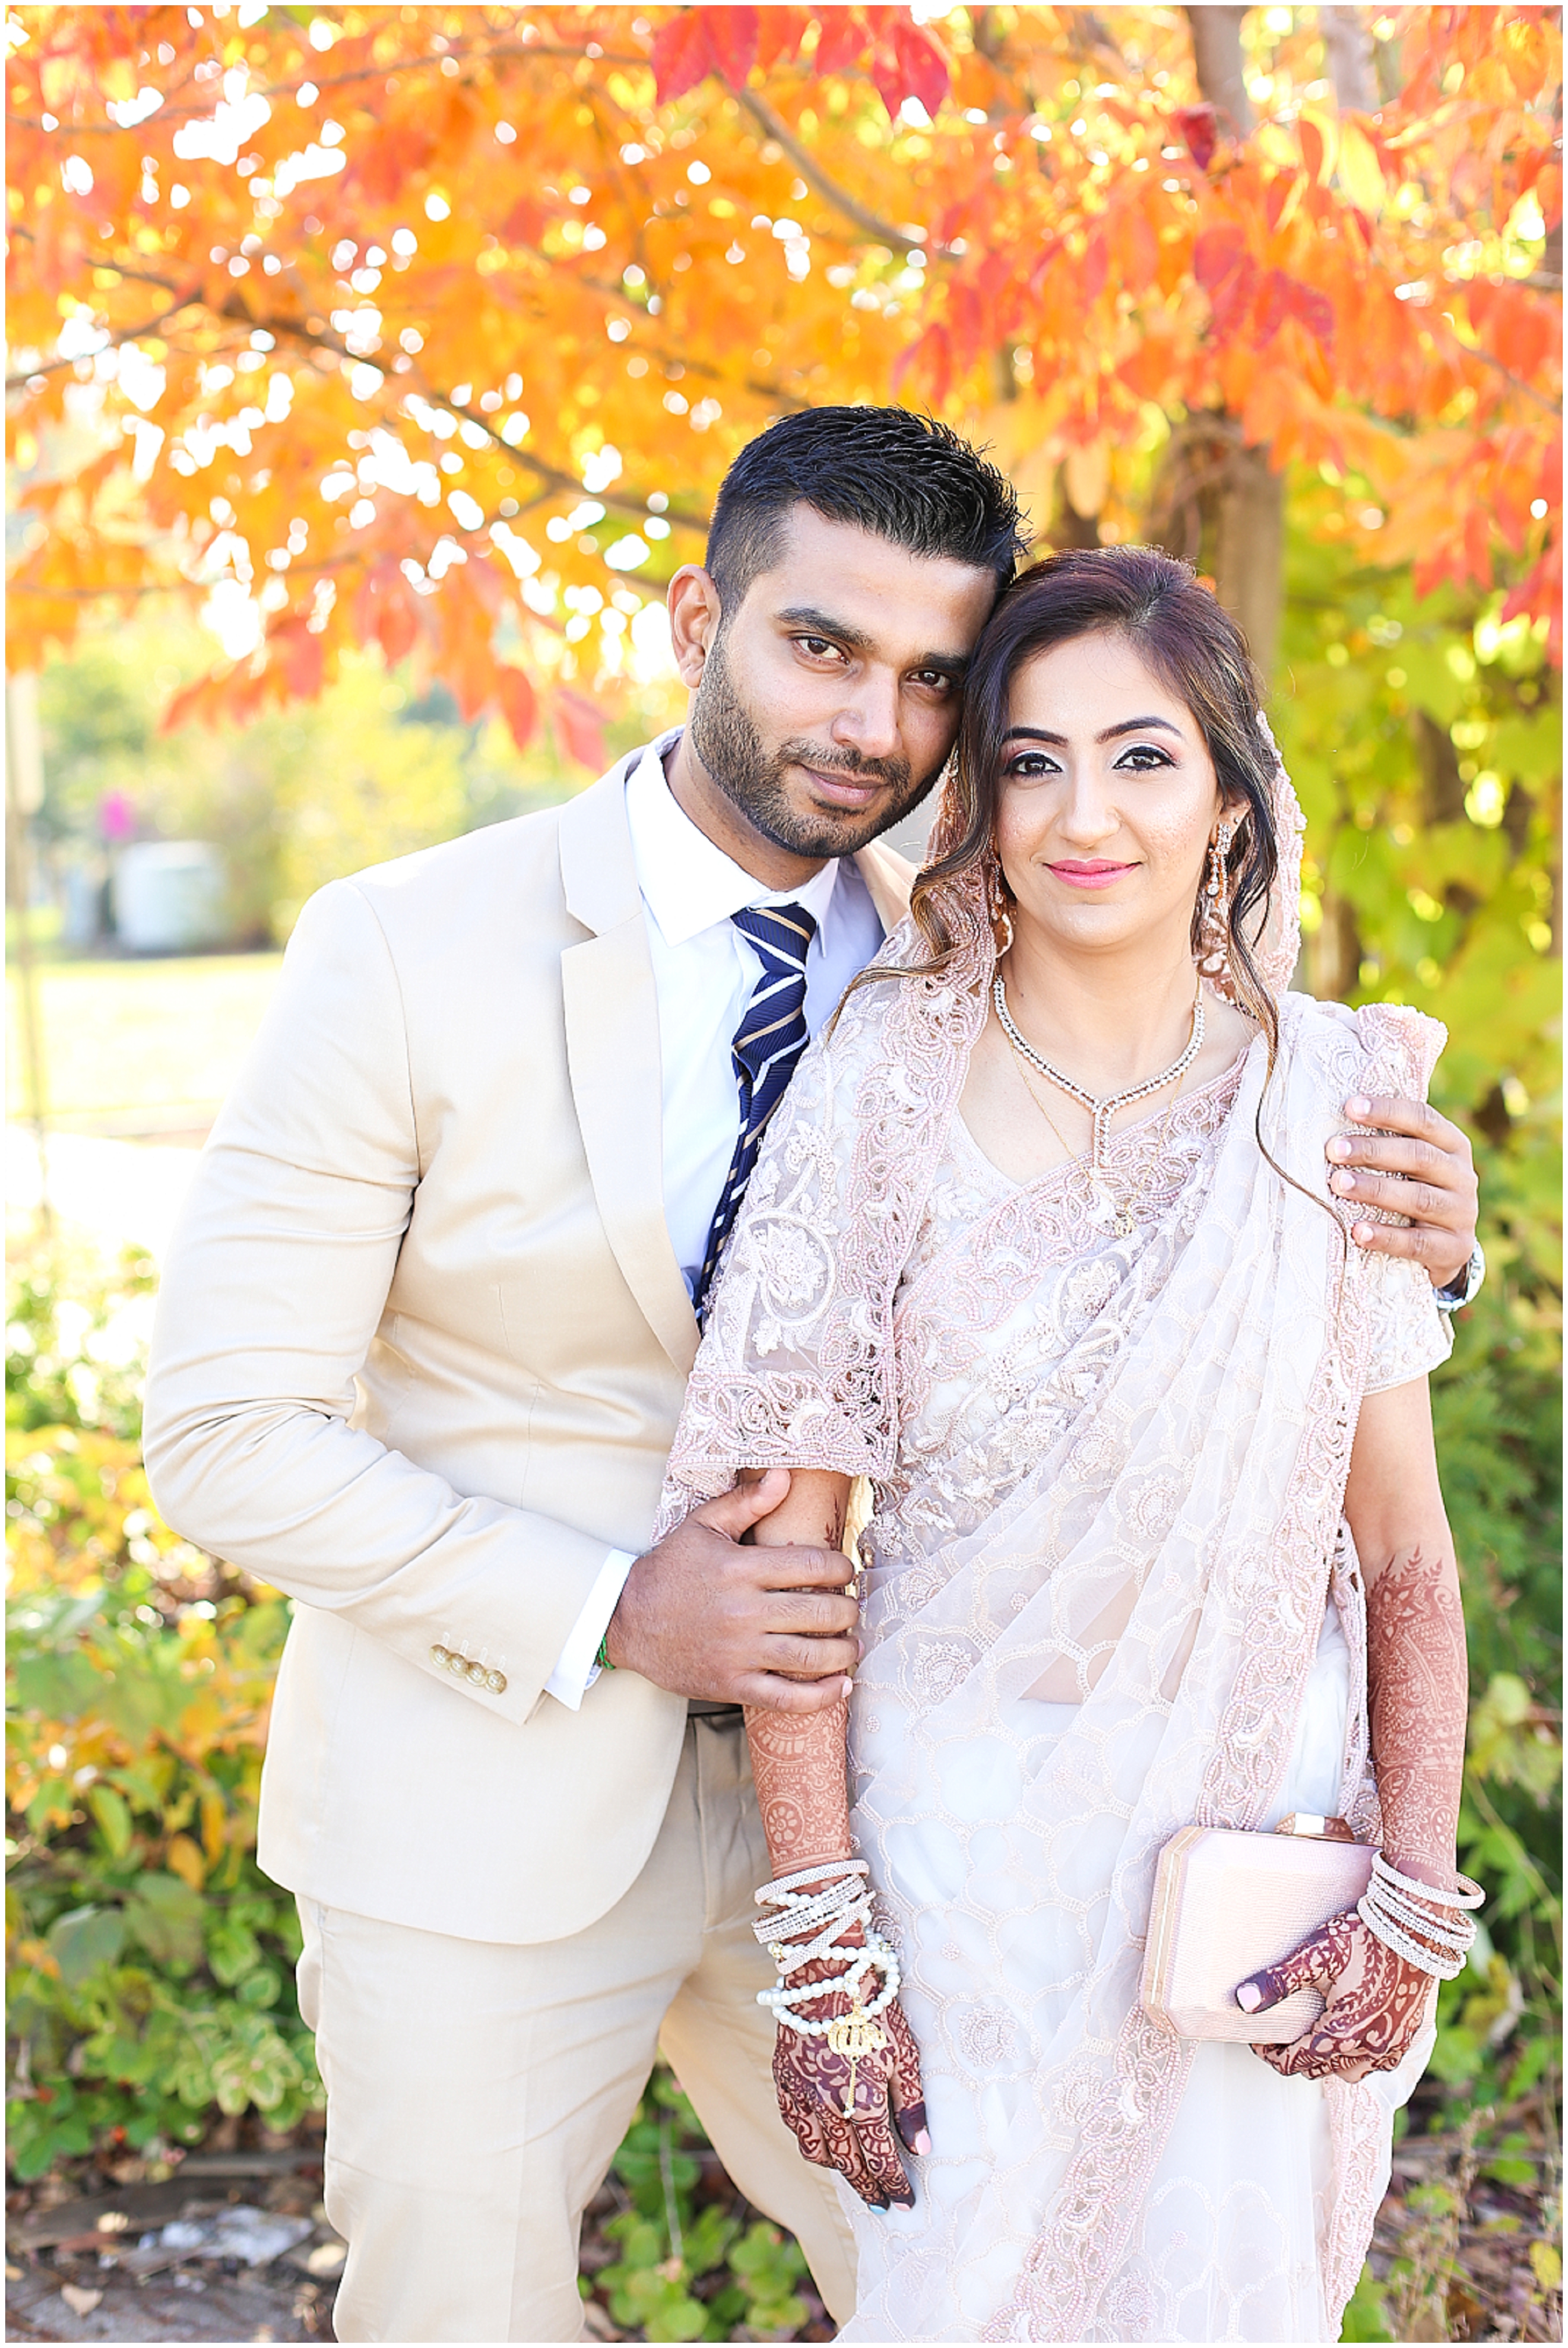 Indian Muslim Hindi Wedding - Family Photos - tips and tricks how to take smooth family photos at your wedding - indian punjab wedding fall - fall kansas city